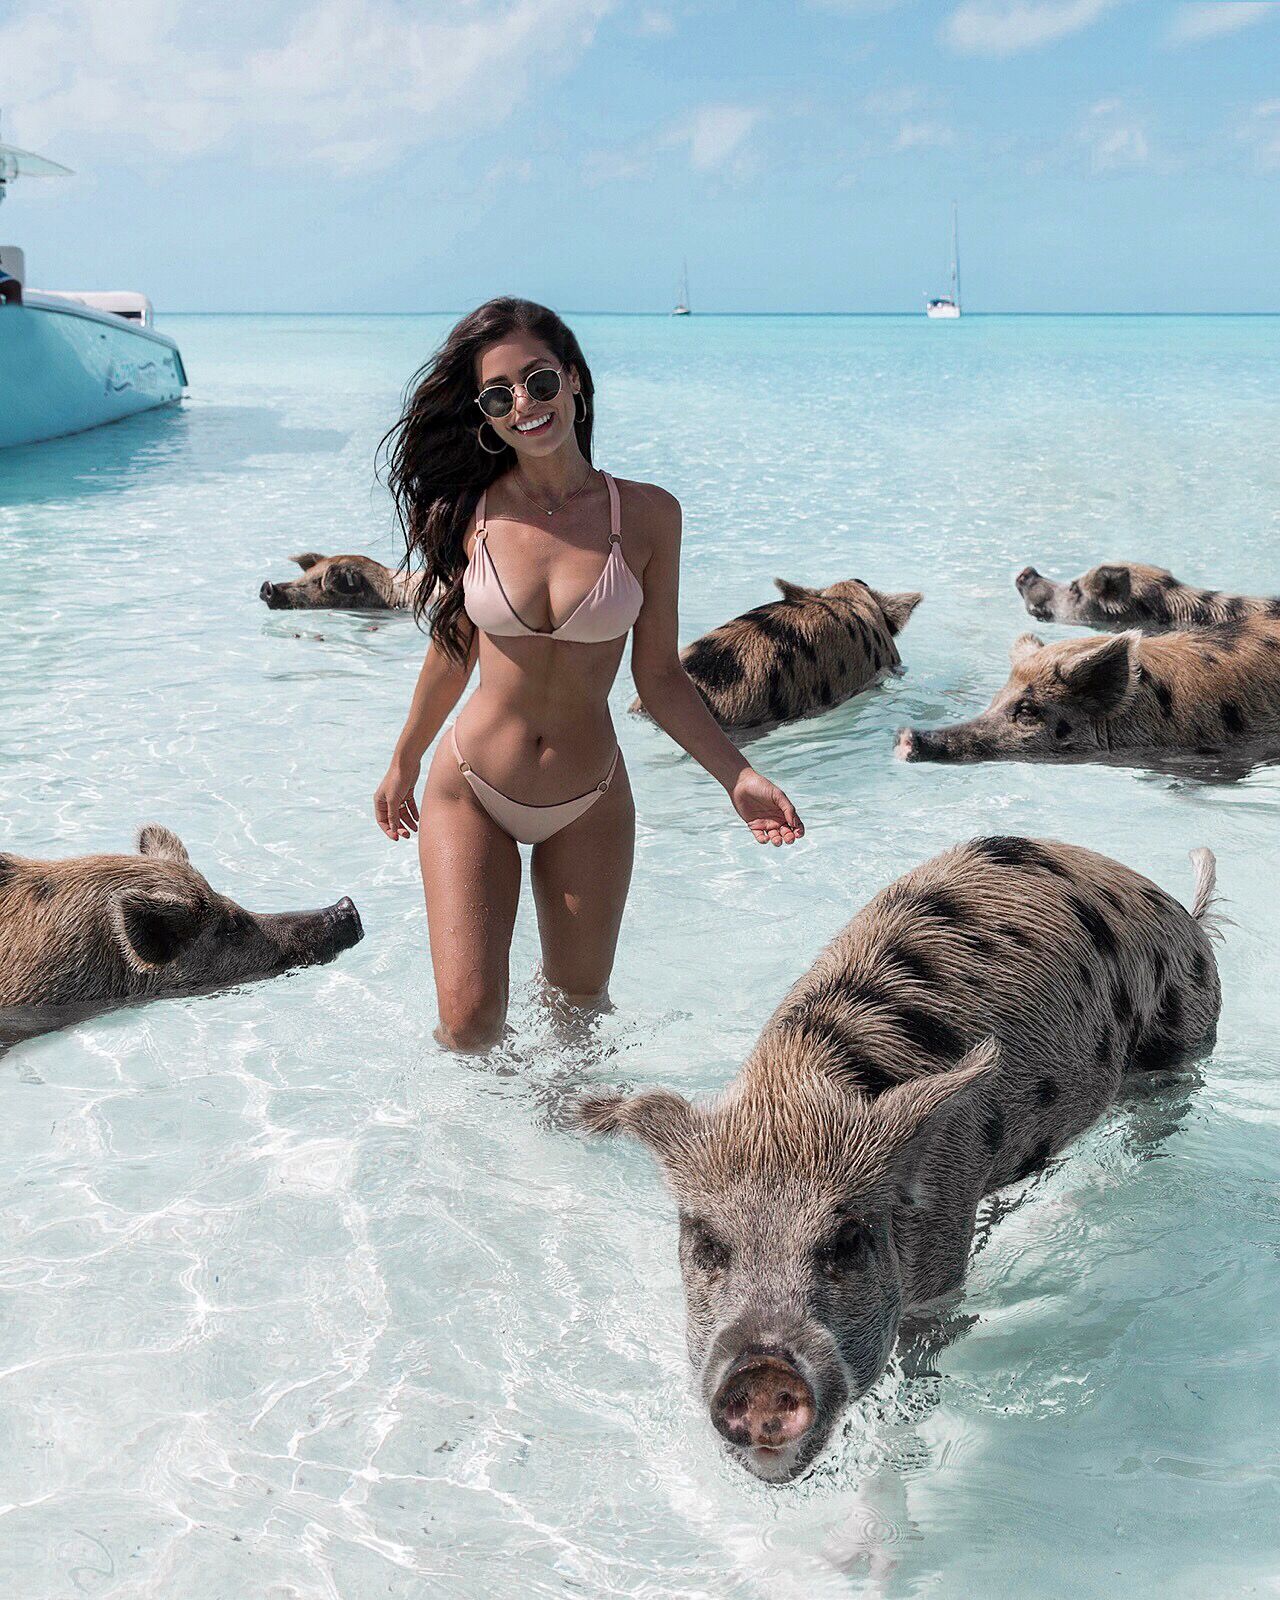 Nicole Isaacs stands in the ocean with pigs.